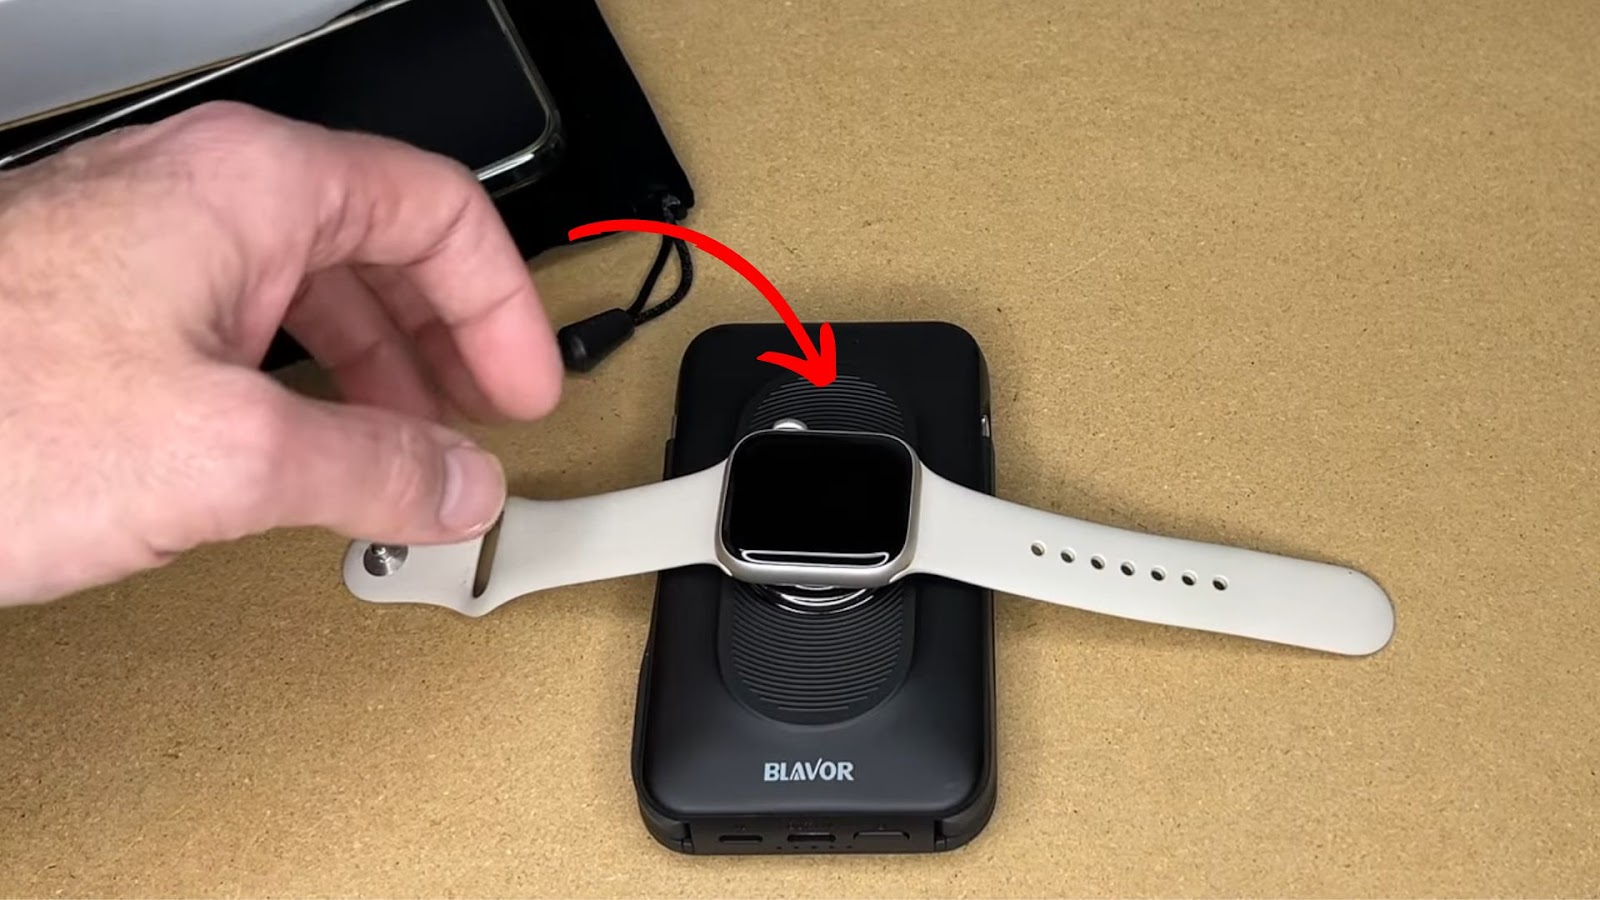 How to Charge the Apple Watch With a Power Bank